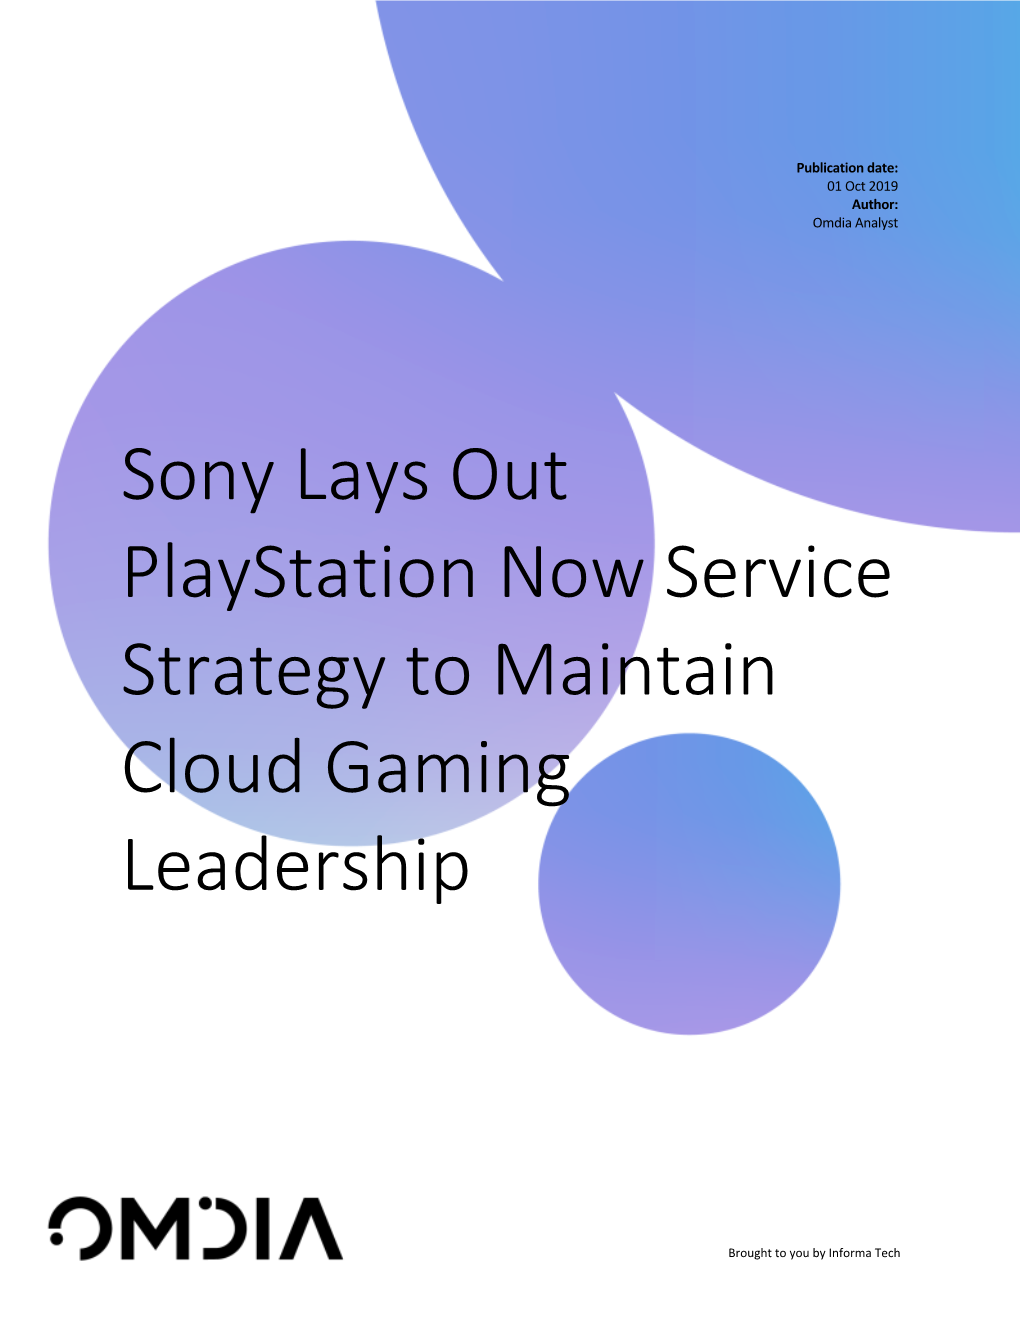 Sony Lays out Playstation Now Service Strategy to Maintain Cloud Gaming Leadership